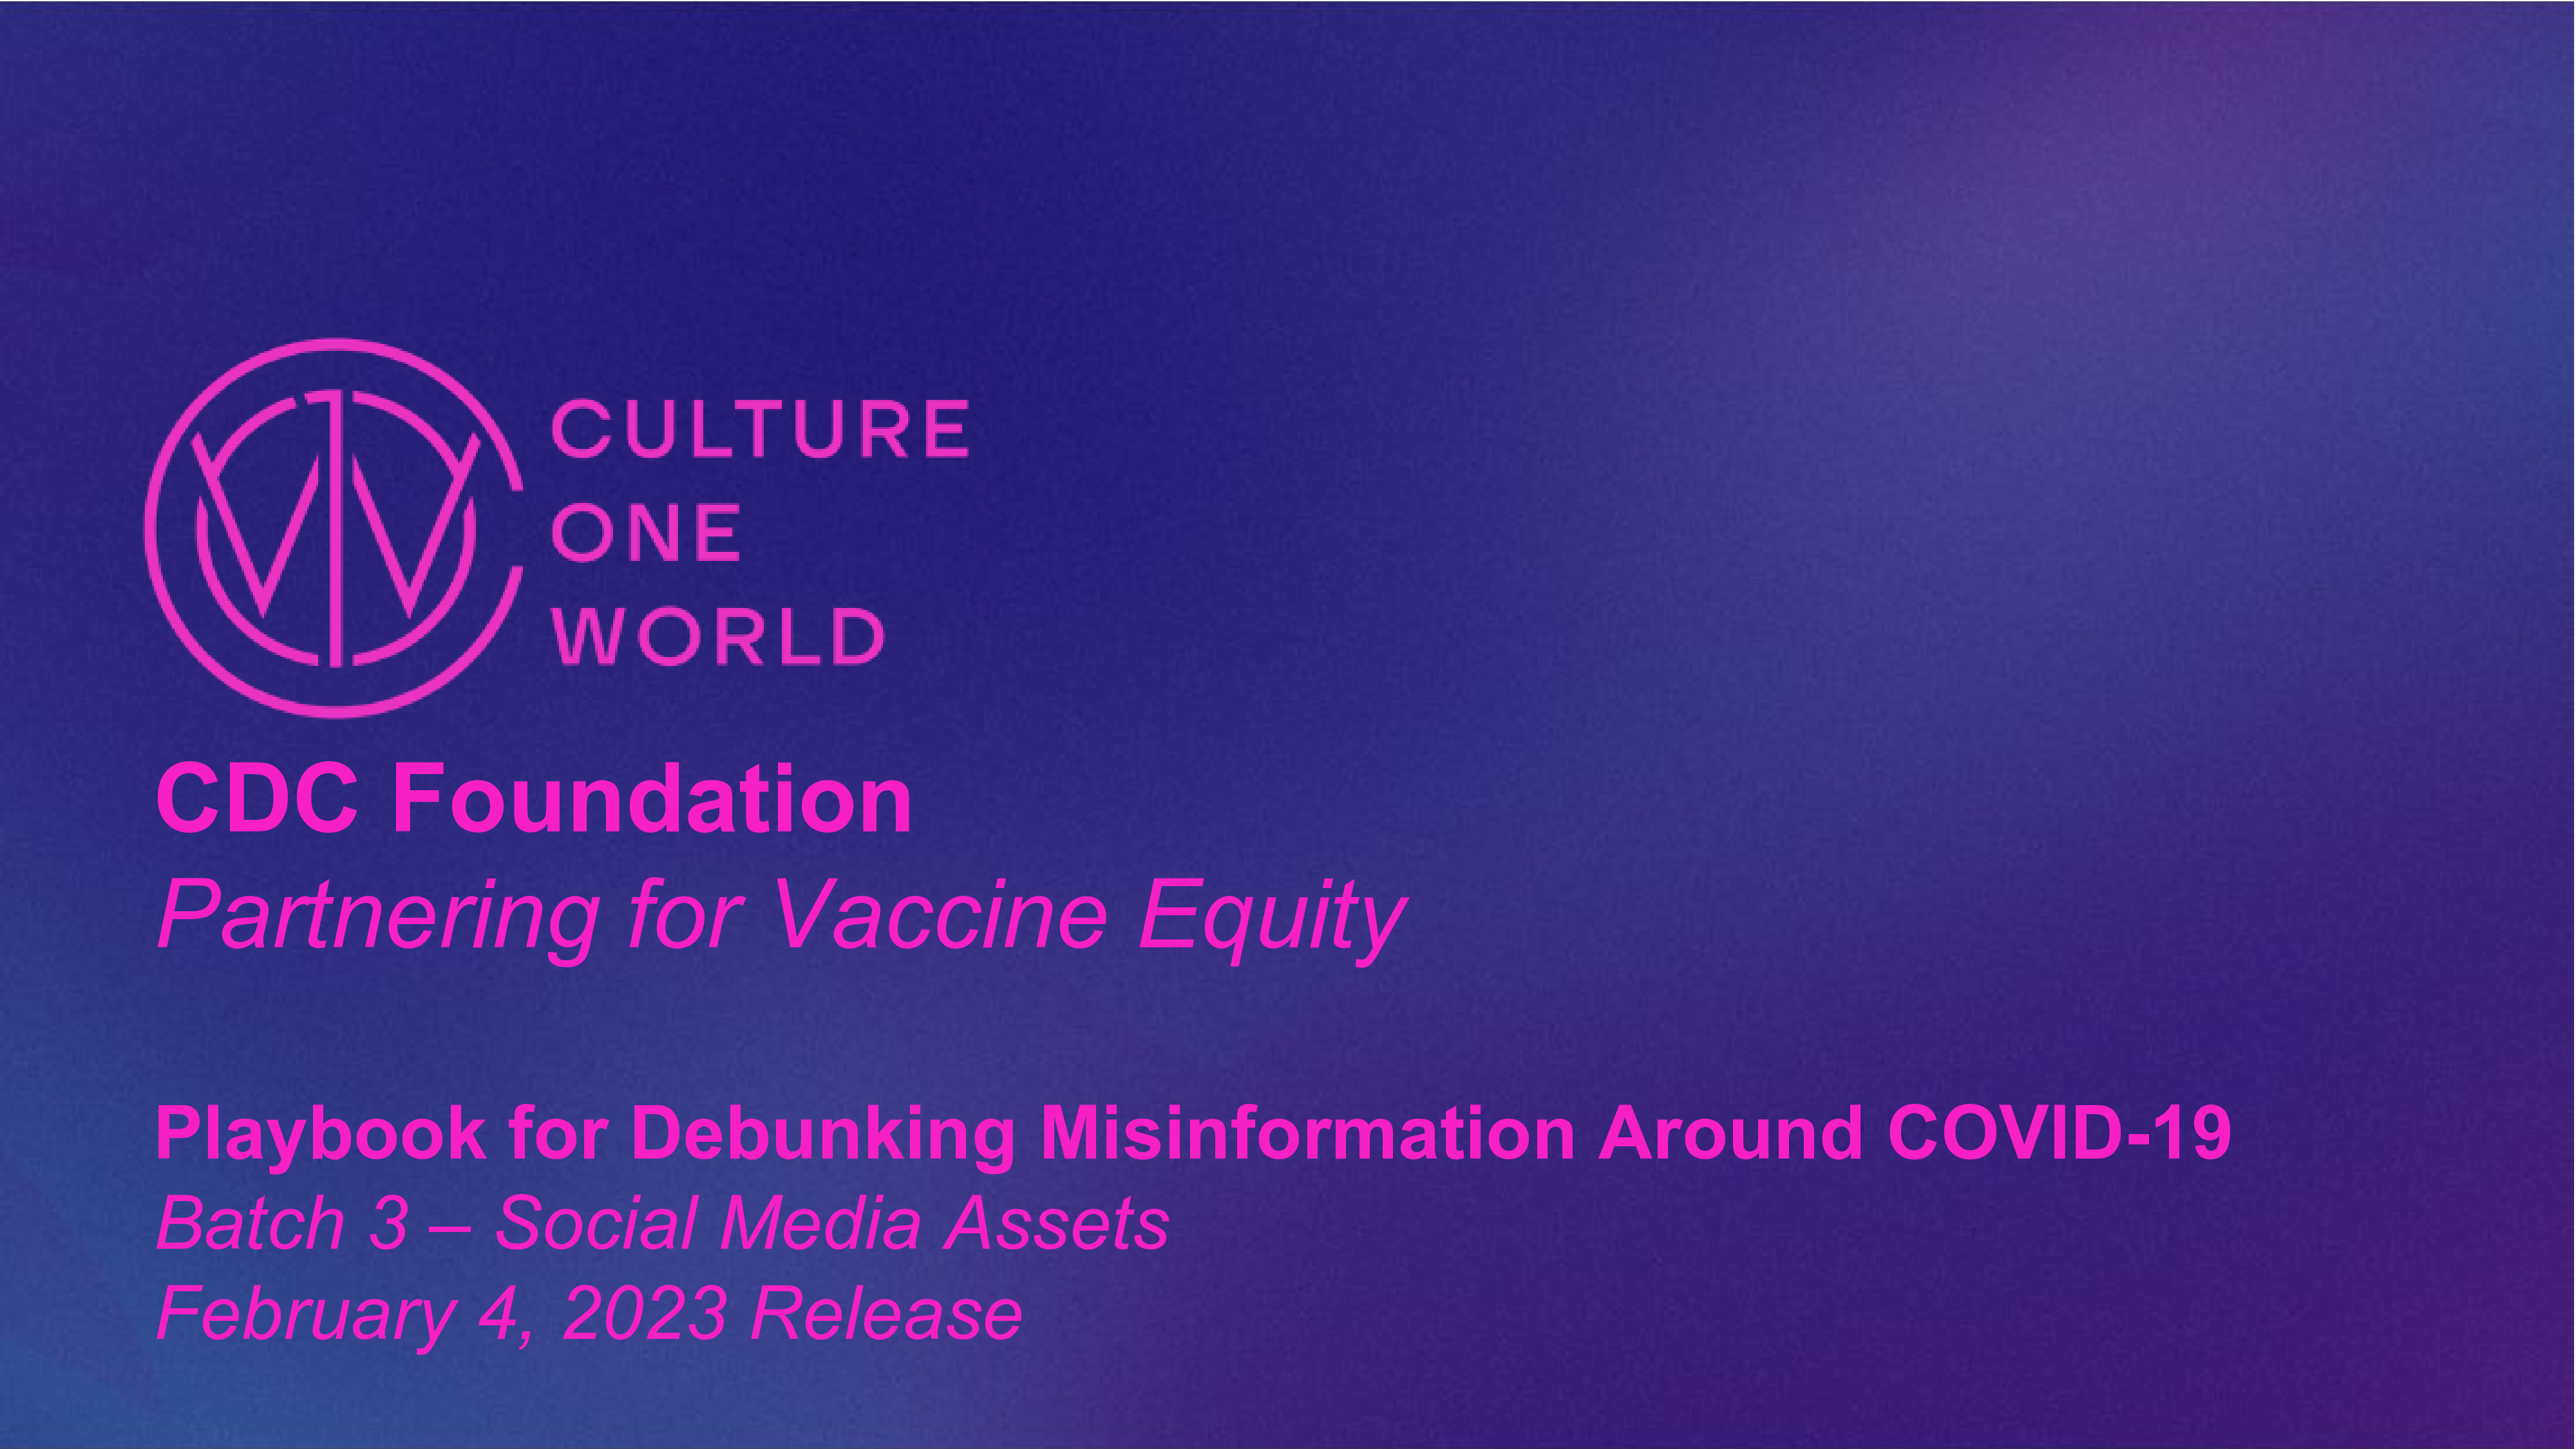 Purple background with pink text. Text reads, "Playbook for Debunking Misinformation Around COVID-19 Batch 3 –Social Media Assets February 4, 2023 Release"